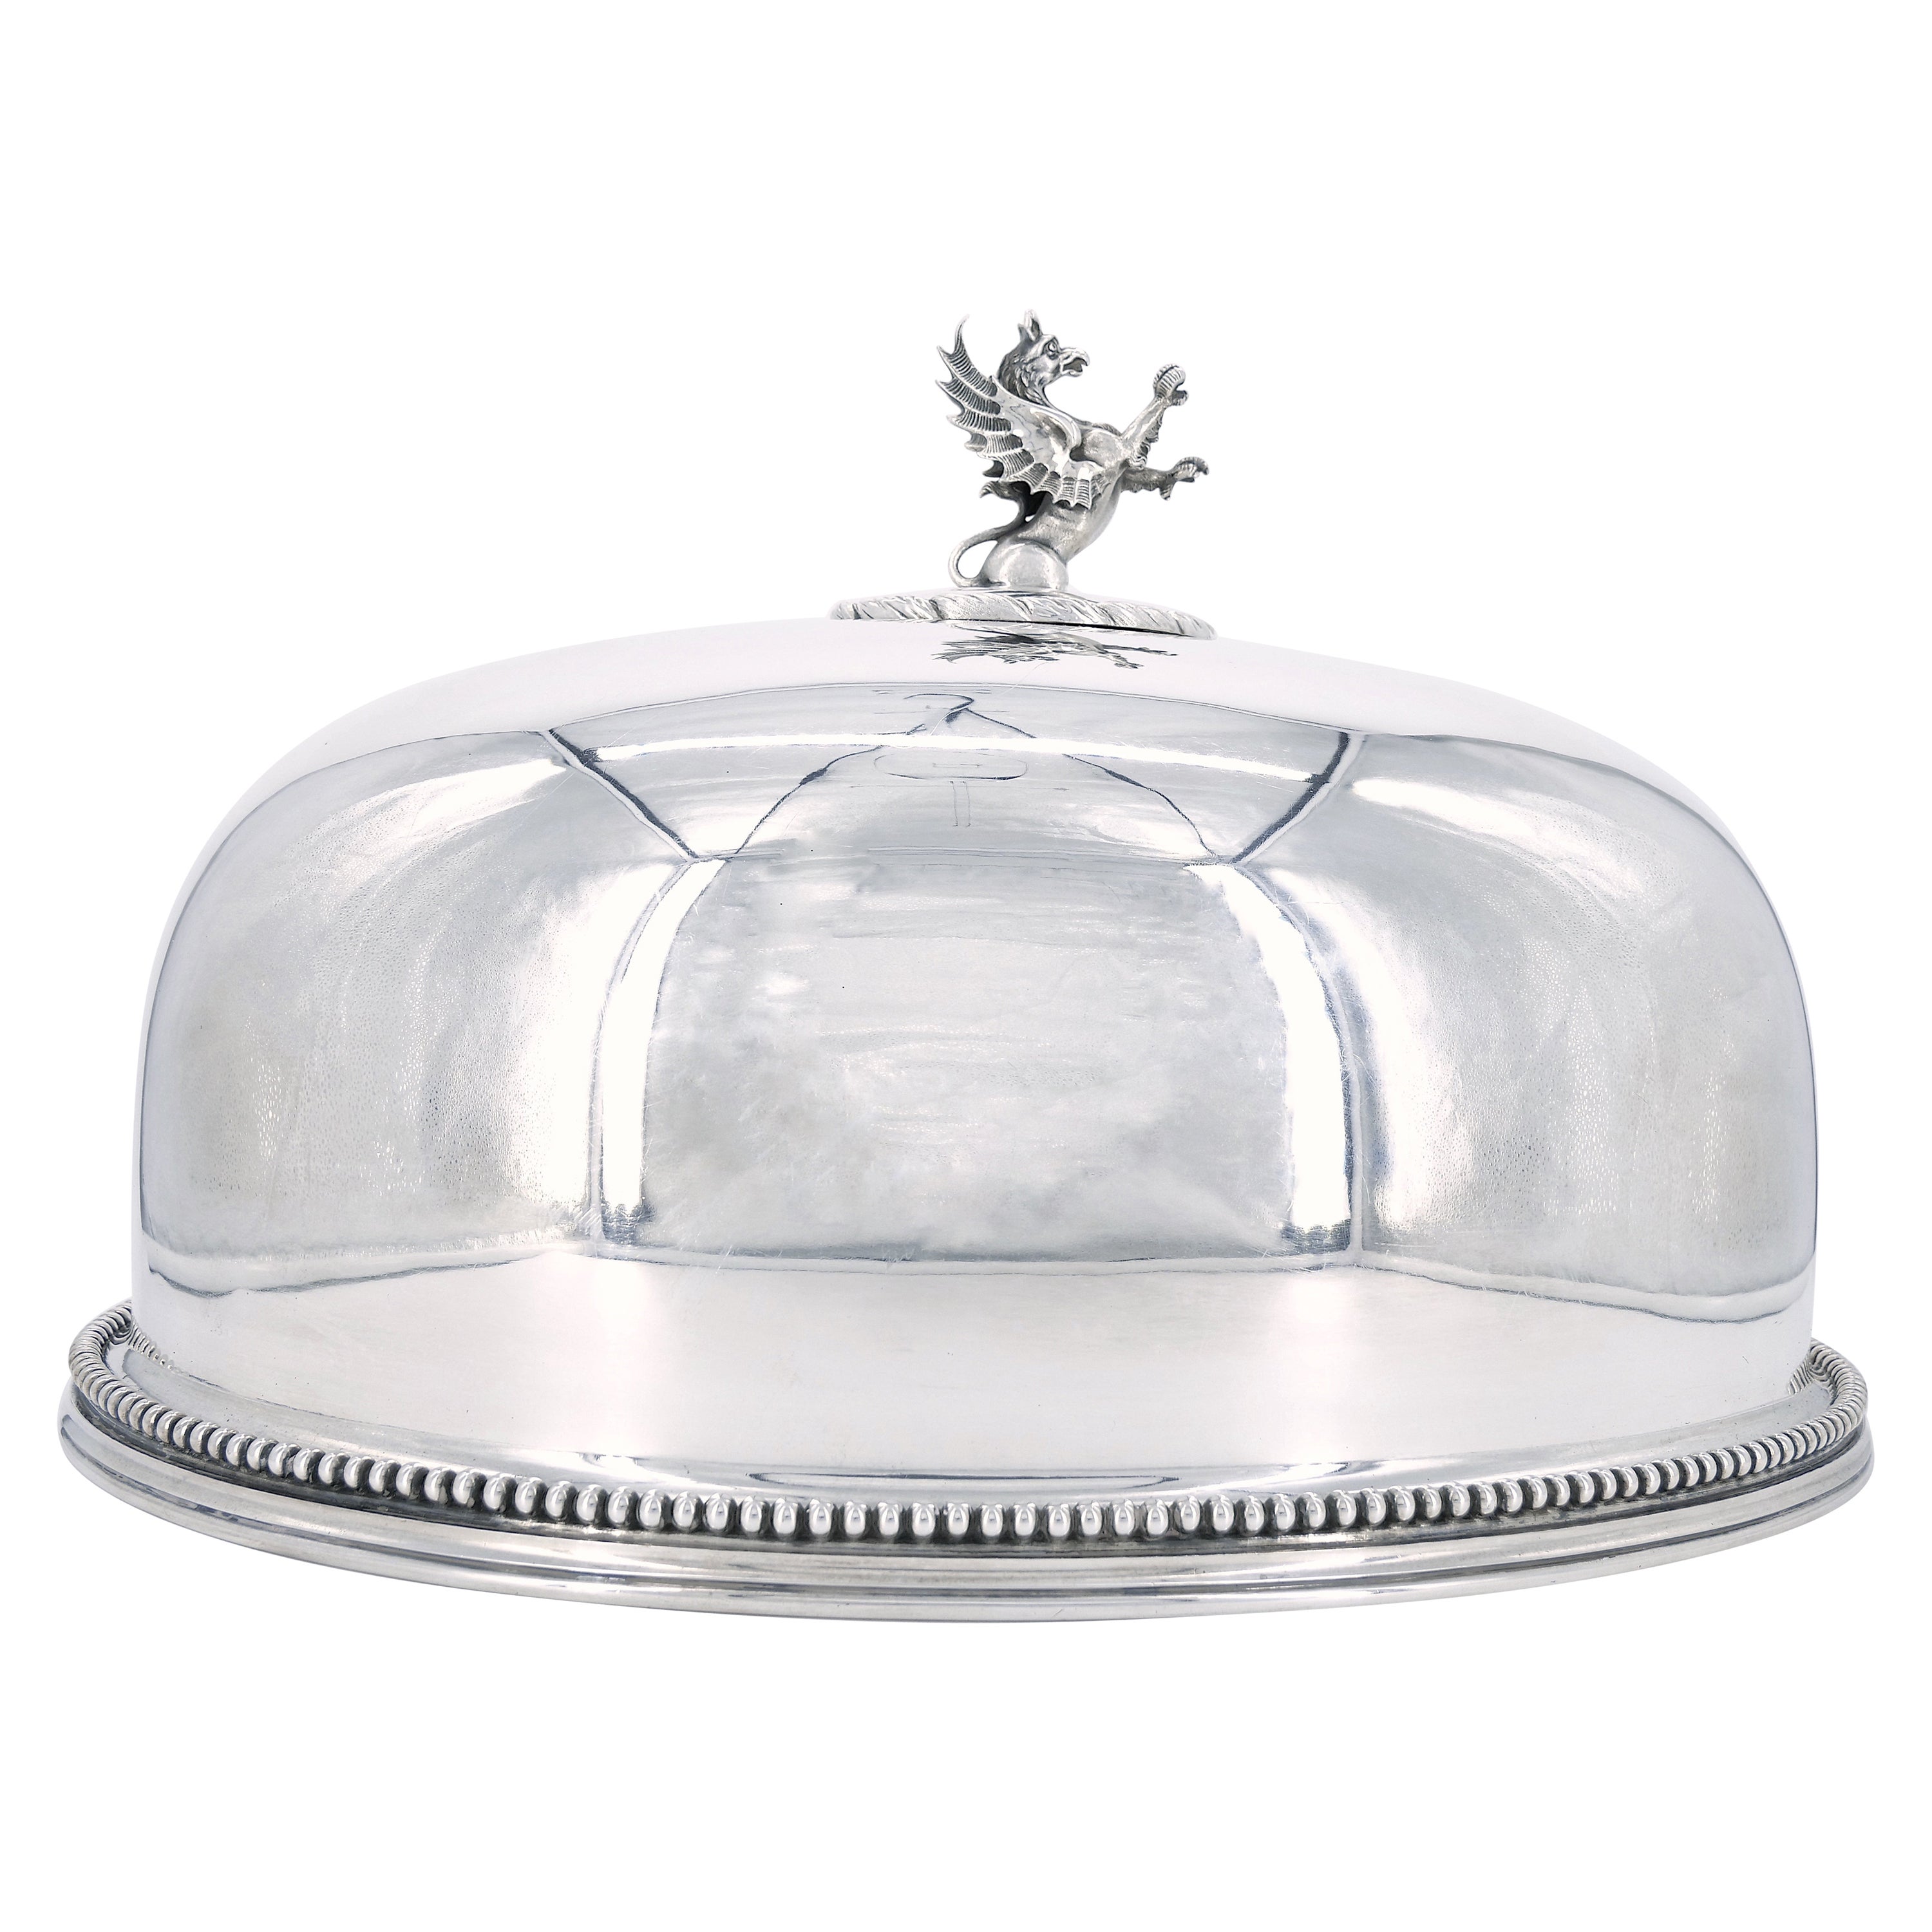 19th Century English Silverplate Meat Dome with Dragon Finial Handle For Sale